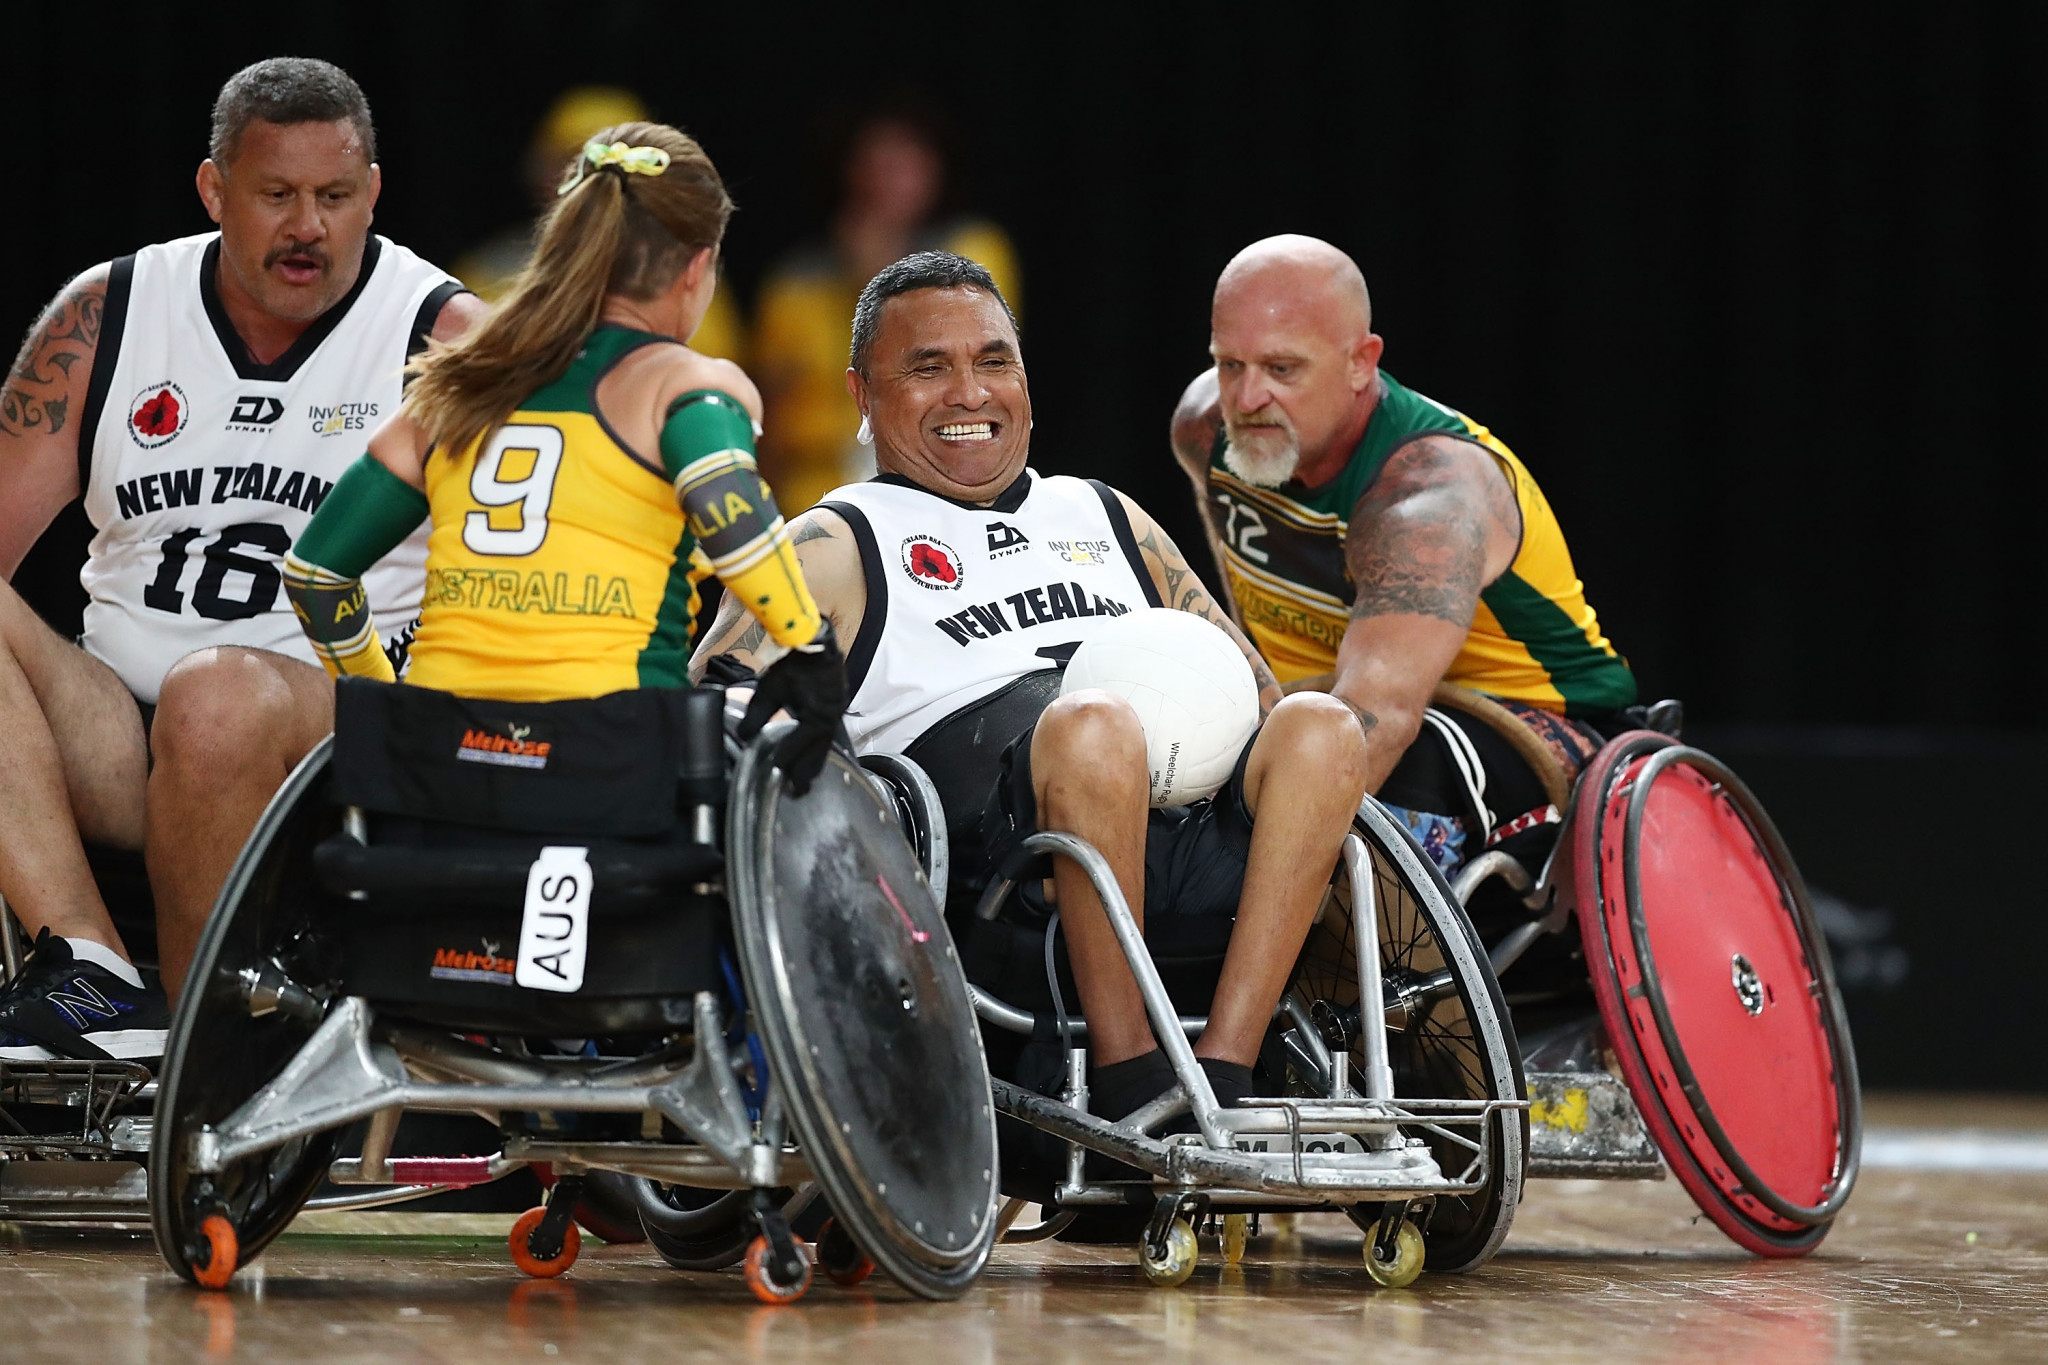 Wheelchair rugby is set to make its World Games debut at Birmingham 2022 ©Getty Images